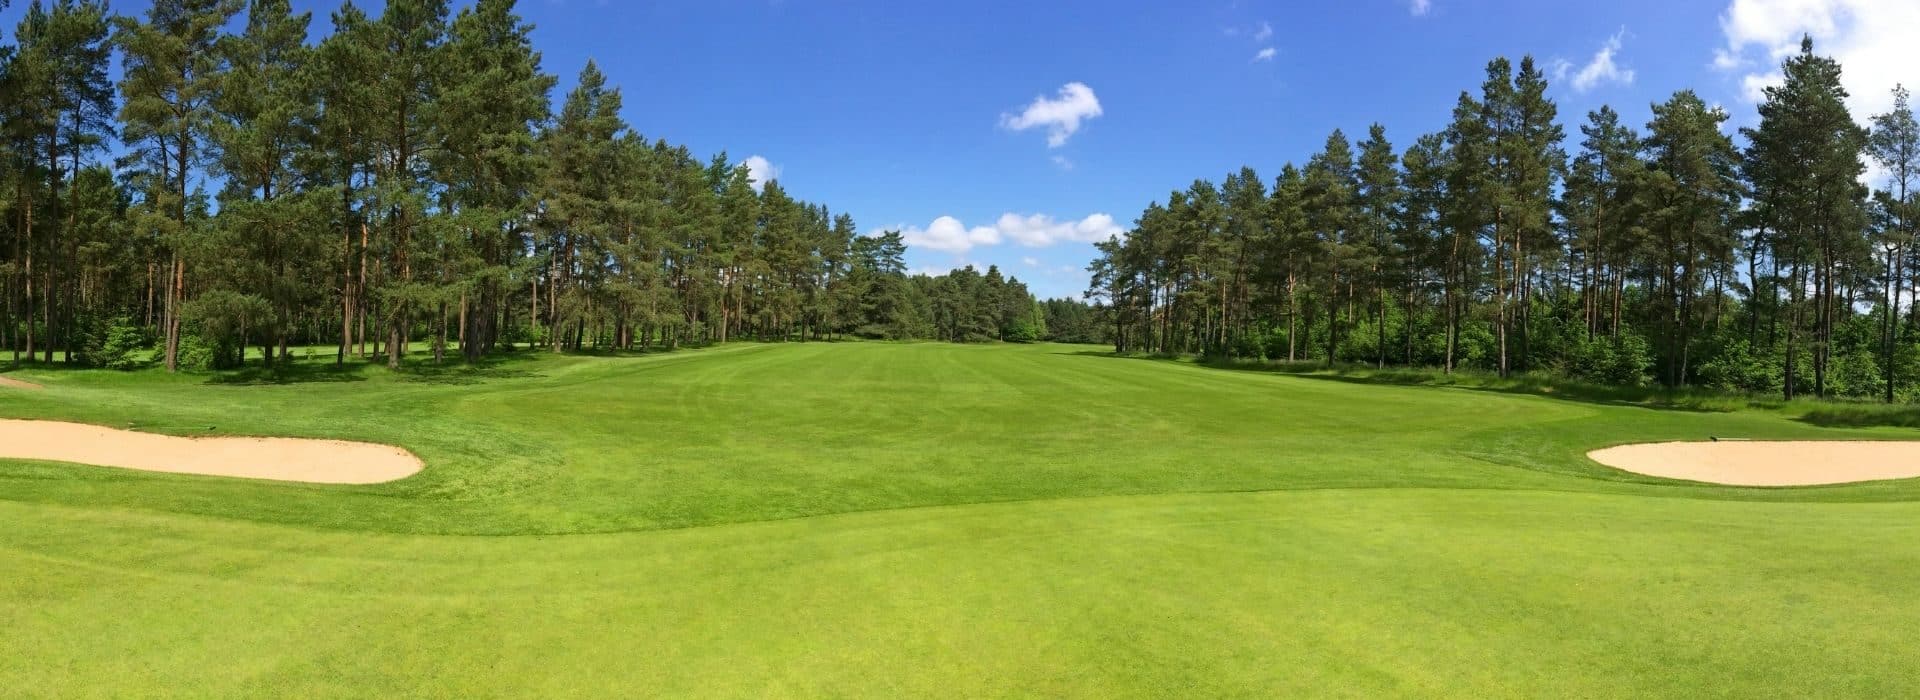 Stunning view of a grassy green golf course with bunkers on each side surrounded by tall trees and blue skies